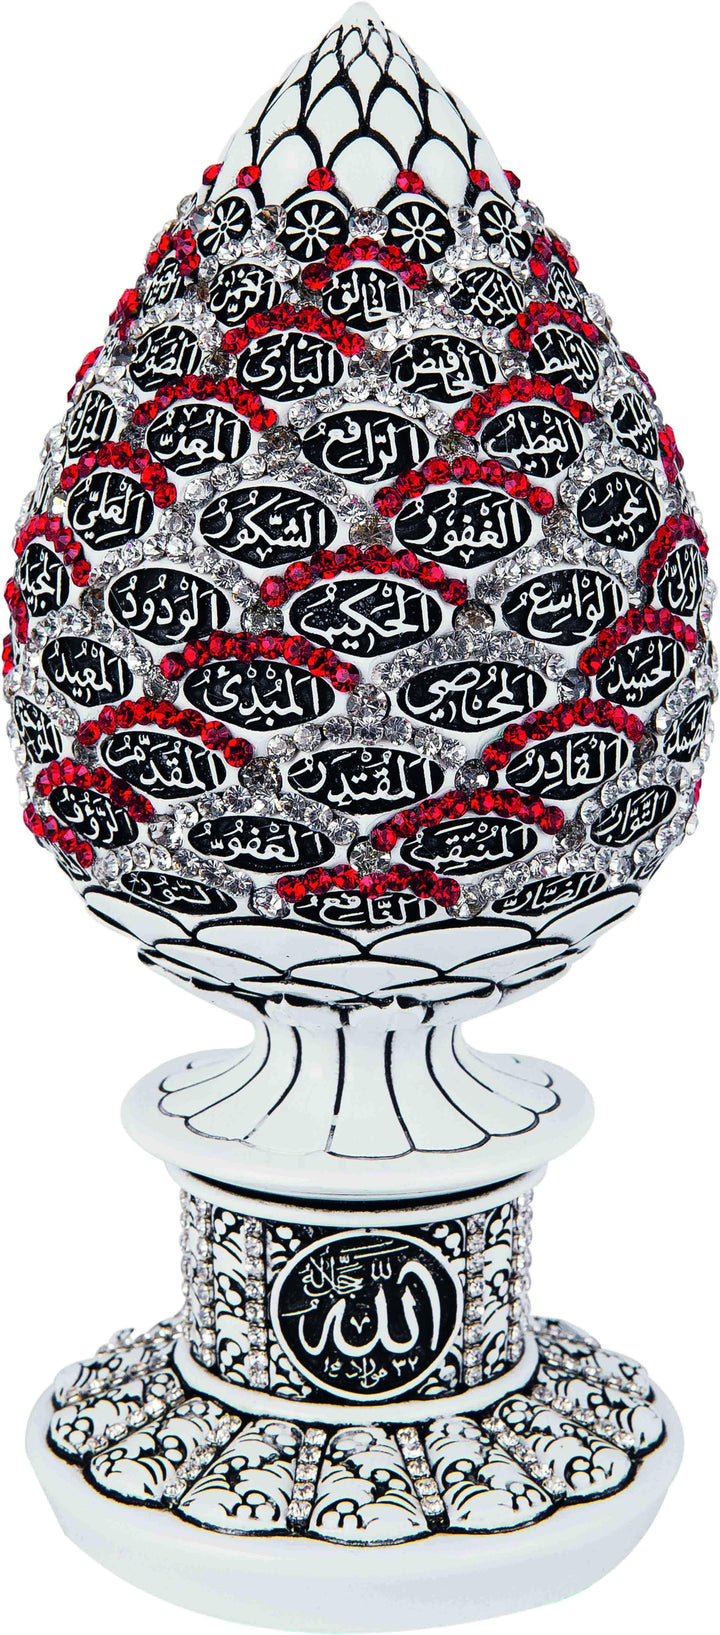 Islamic Table Decor Golden pine cone with Red stones - 99 Names of Allah Alif collection BB-0930-1675-theislamicshop.com